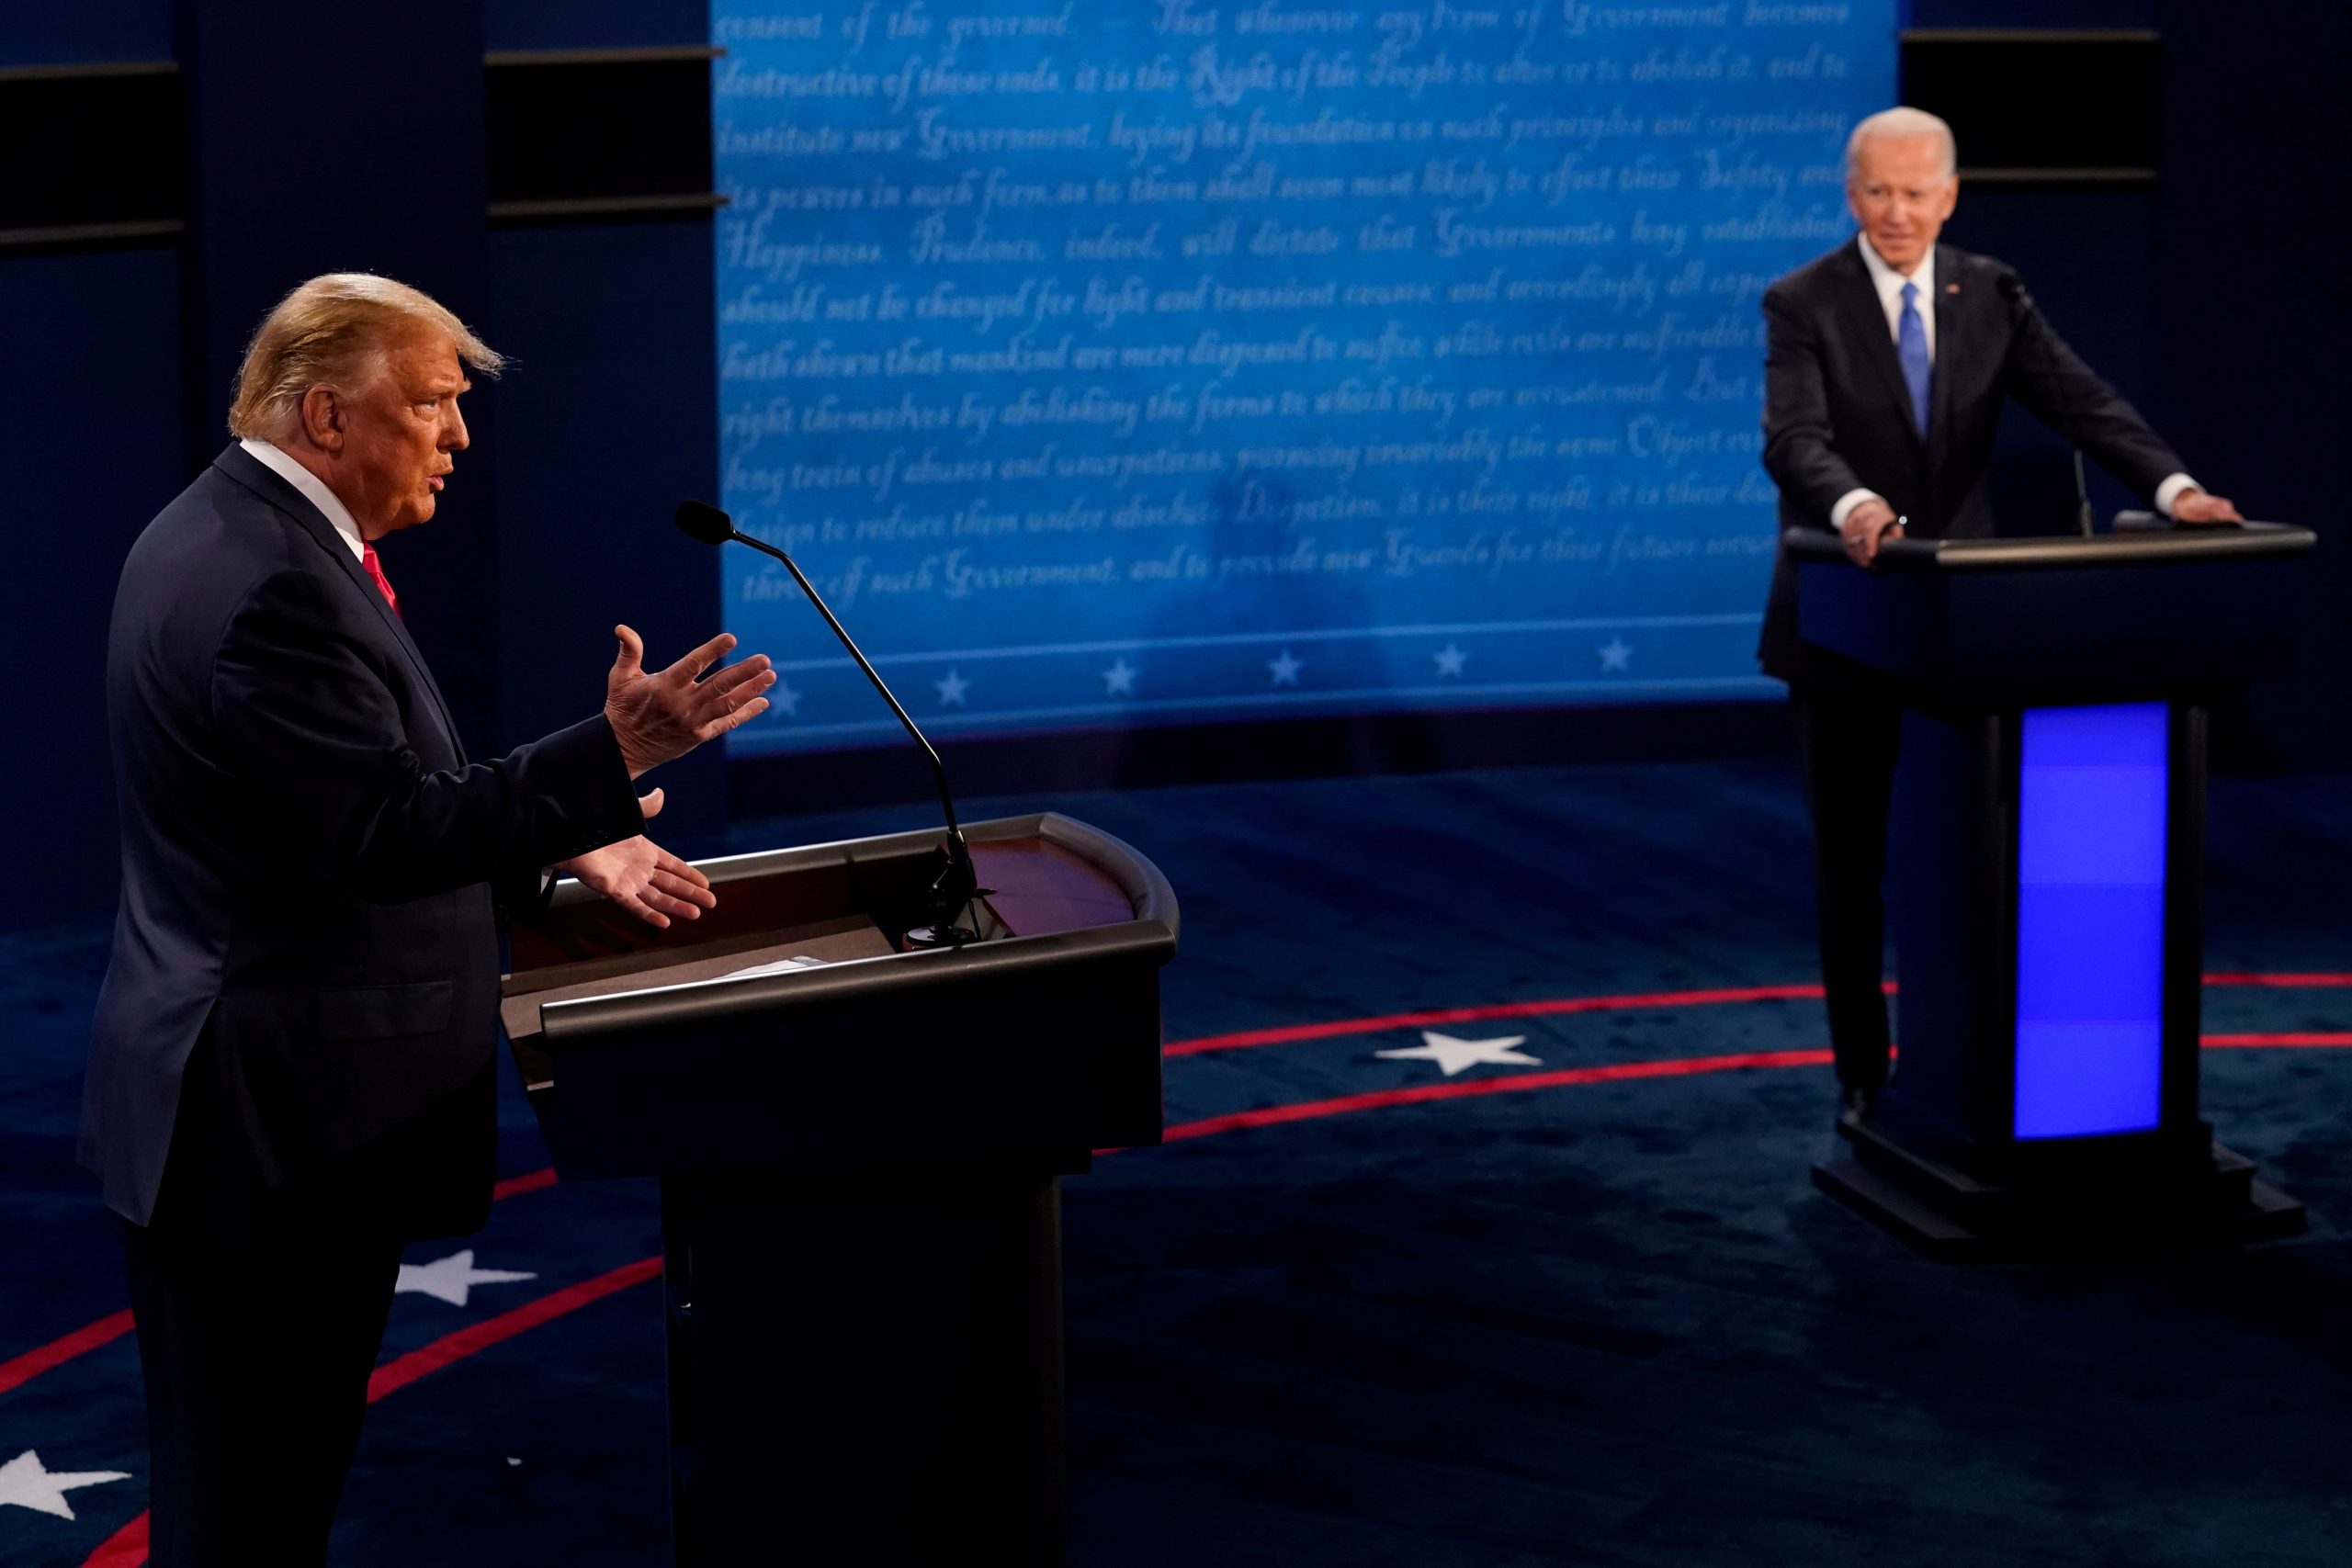 U.S. President Donald Trump answers a question as Democratic presidential candidate former Vice President Joe Biden listens during the second and final presidential debate at the Curb Event Center at Belmont University in Nashville, Tennessee, U.S., October 22, 2020. Morry Gash/Pool via REUTERS